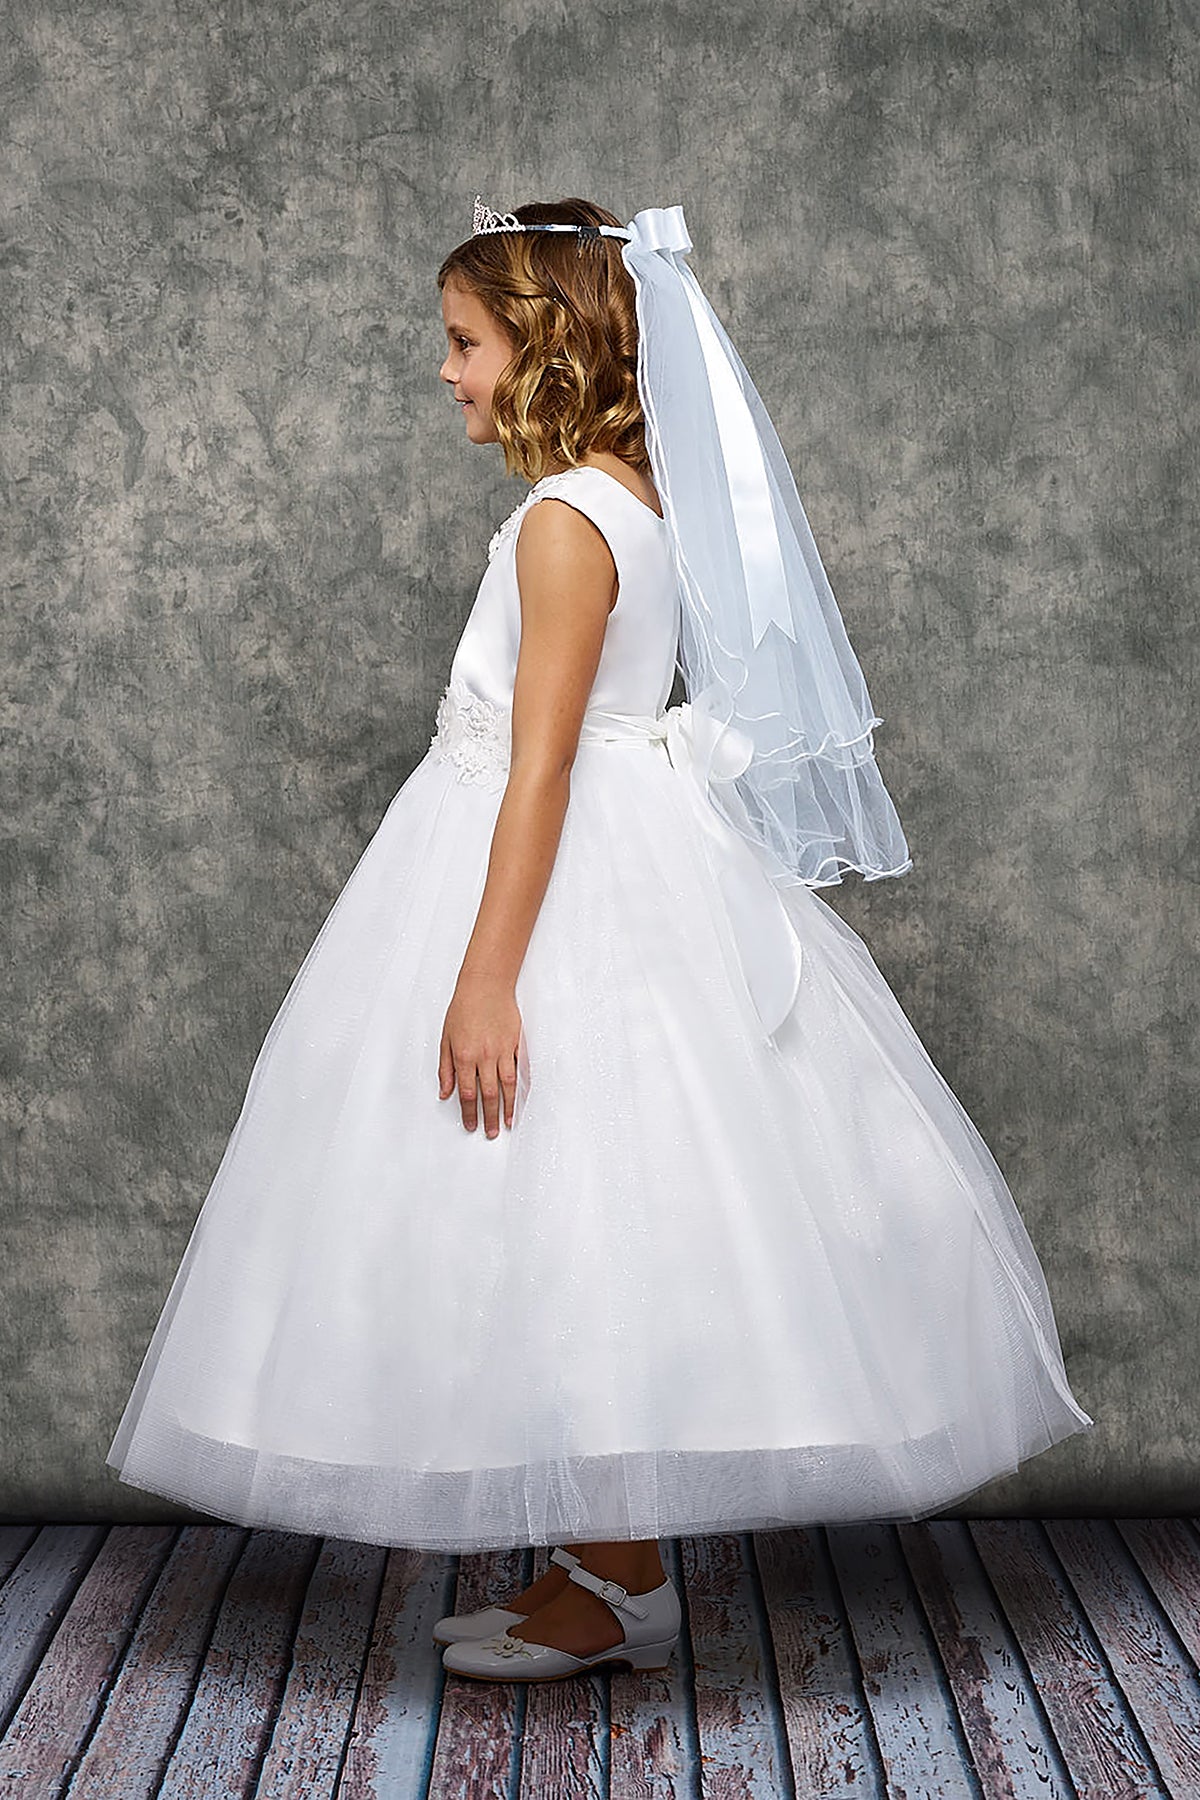 458-A Luxurious Princess Ballgown Dress with Floral Trim and Plus Sizes